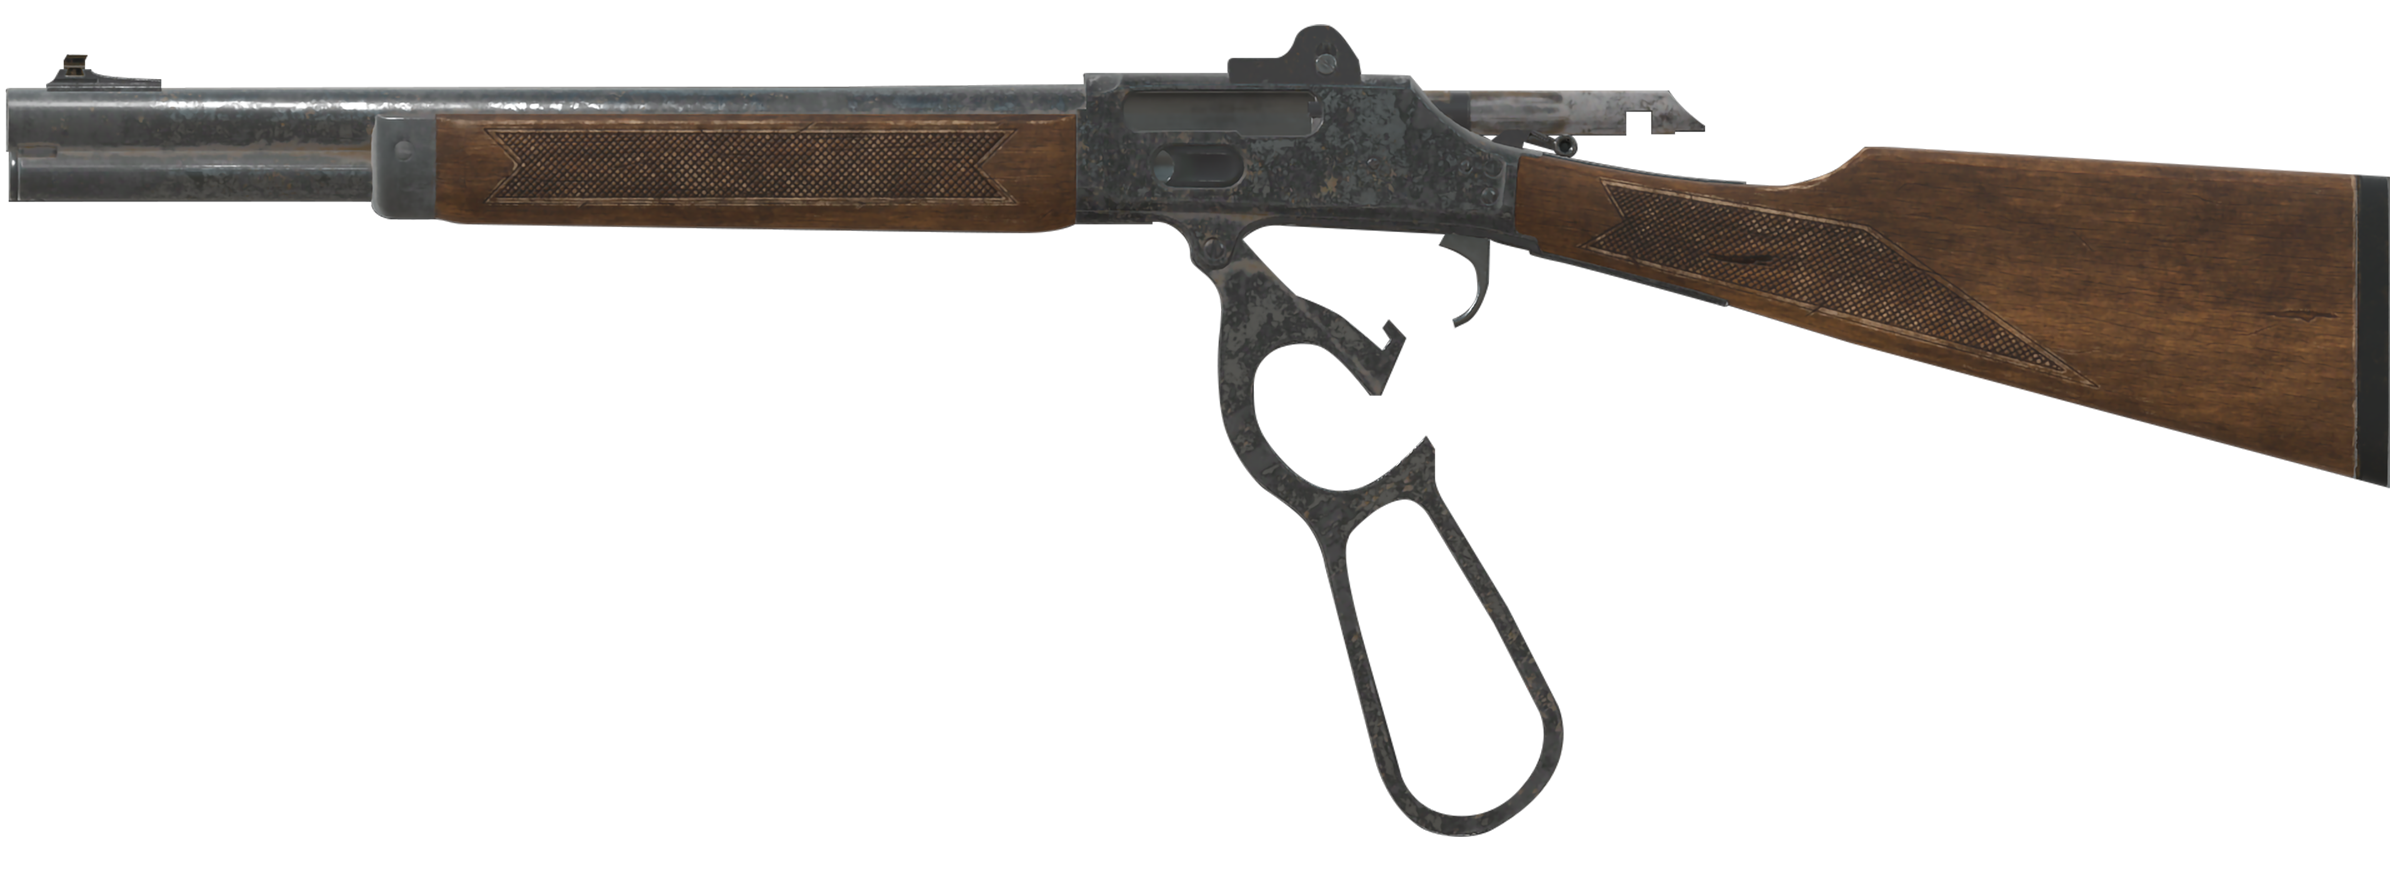 fo4 lever action rifle